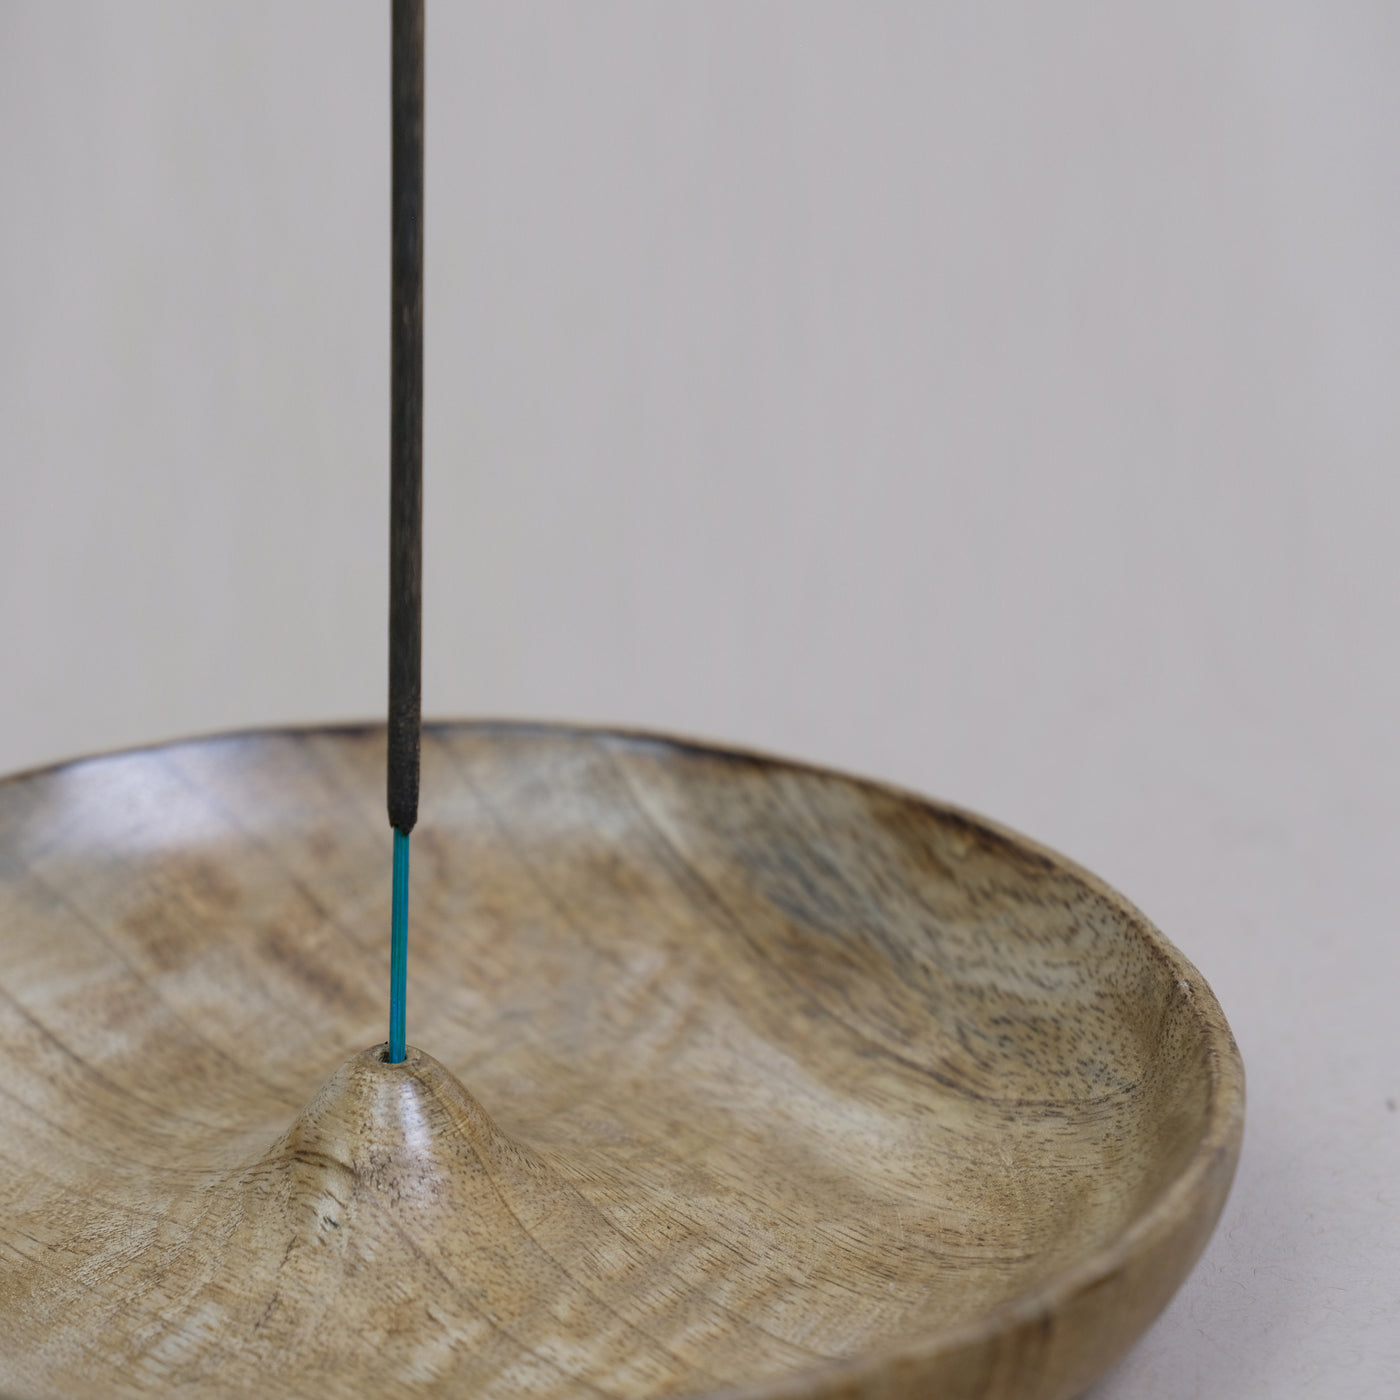 Full Moon Incense Holder (NATURAL FINISH) with 30 Incense sticks